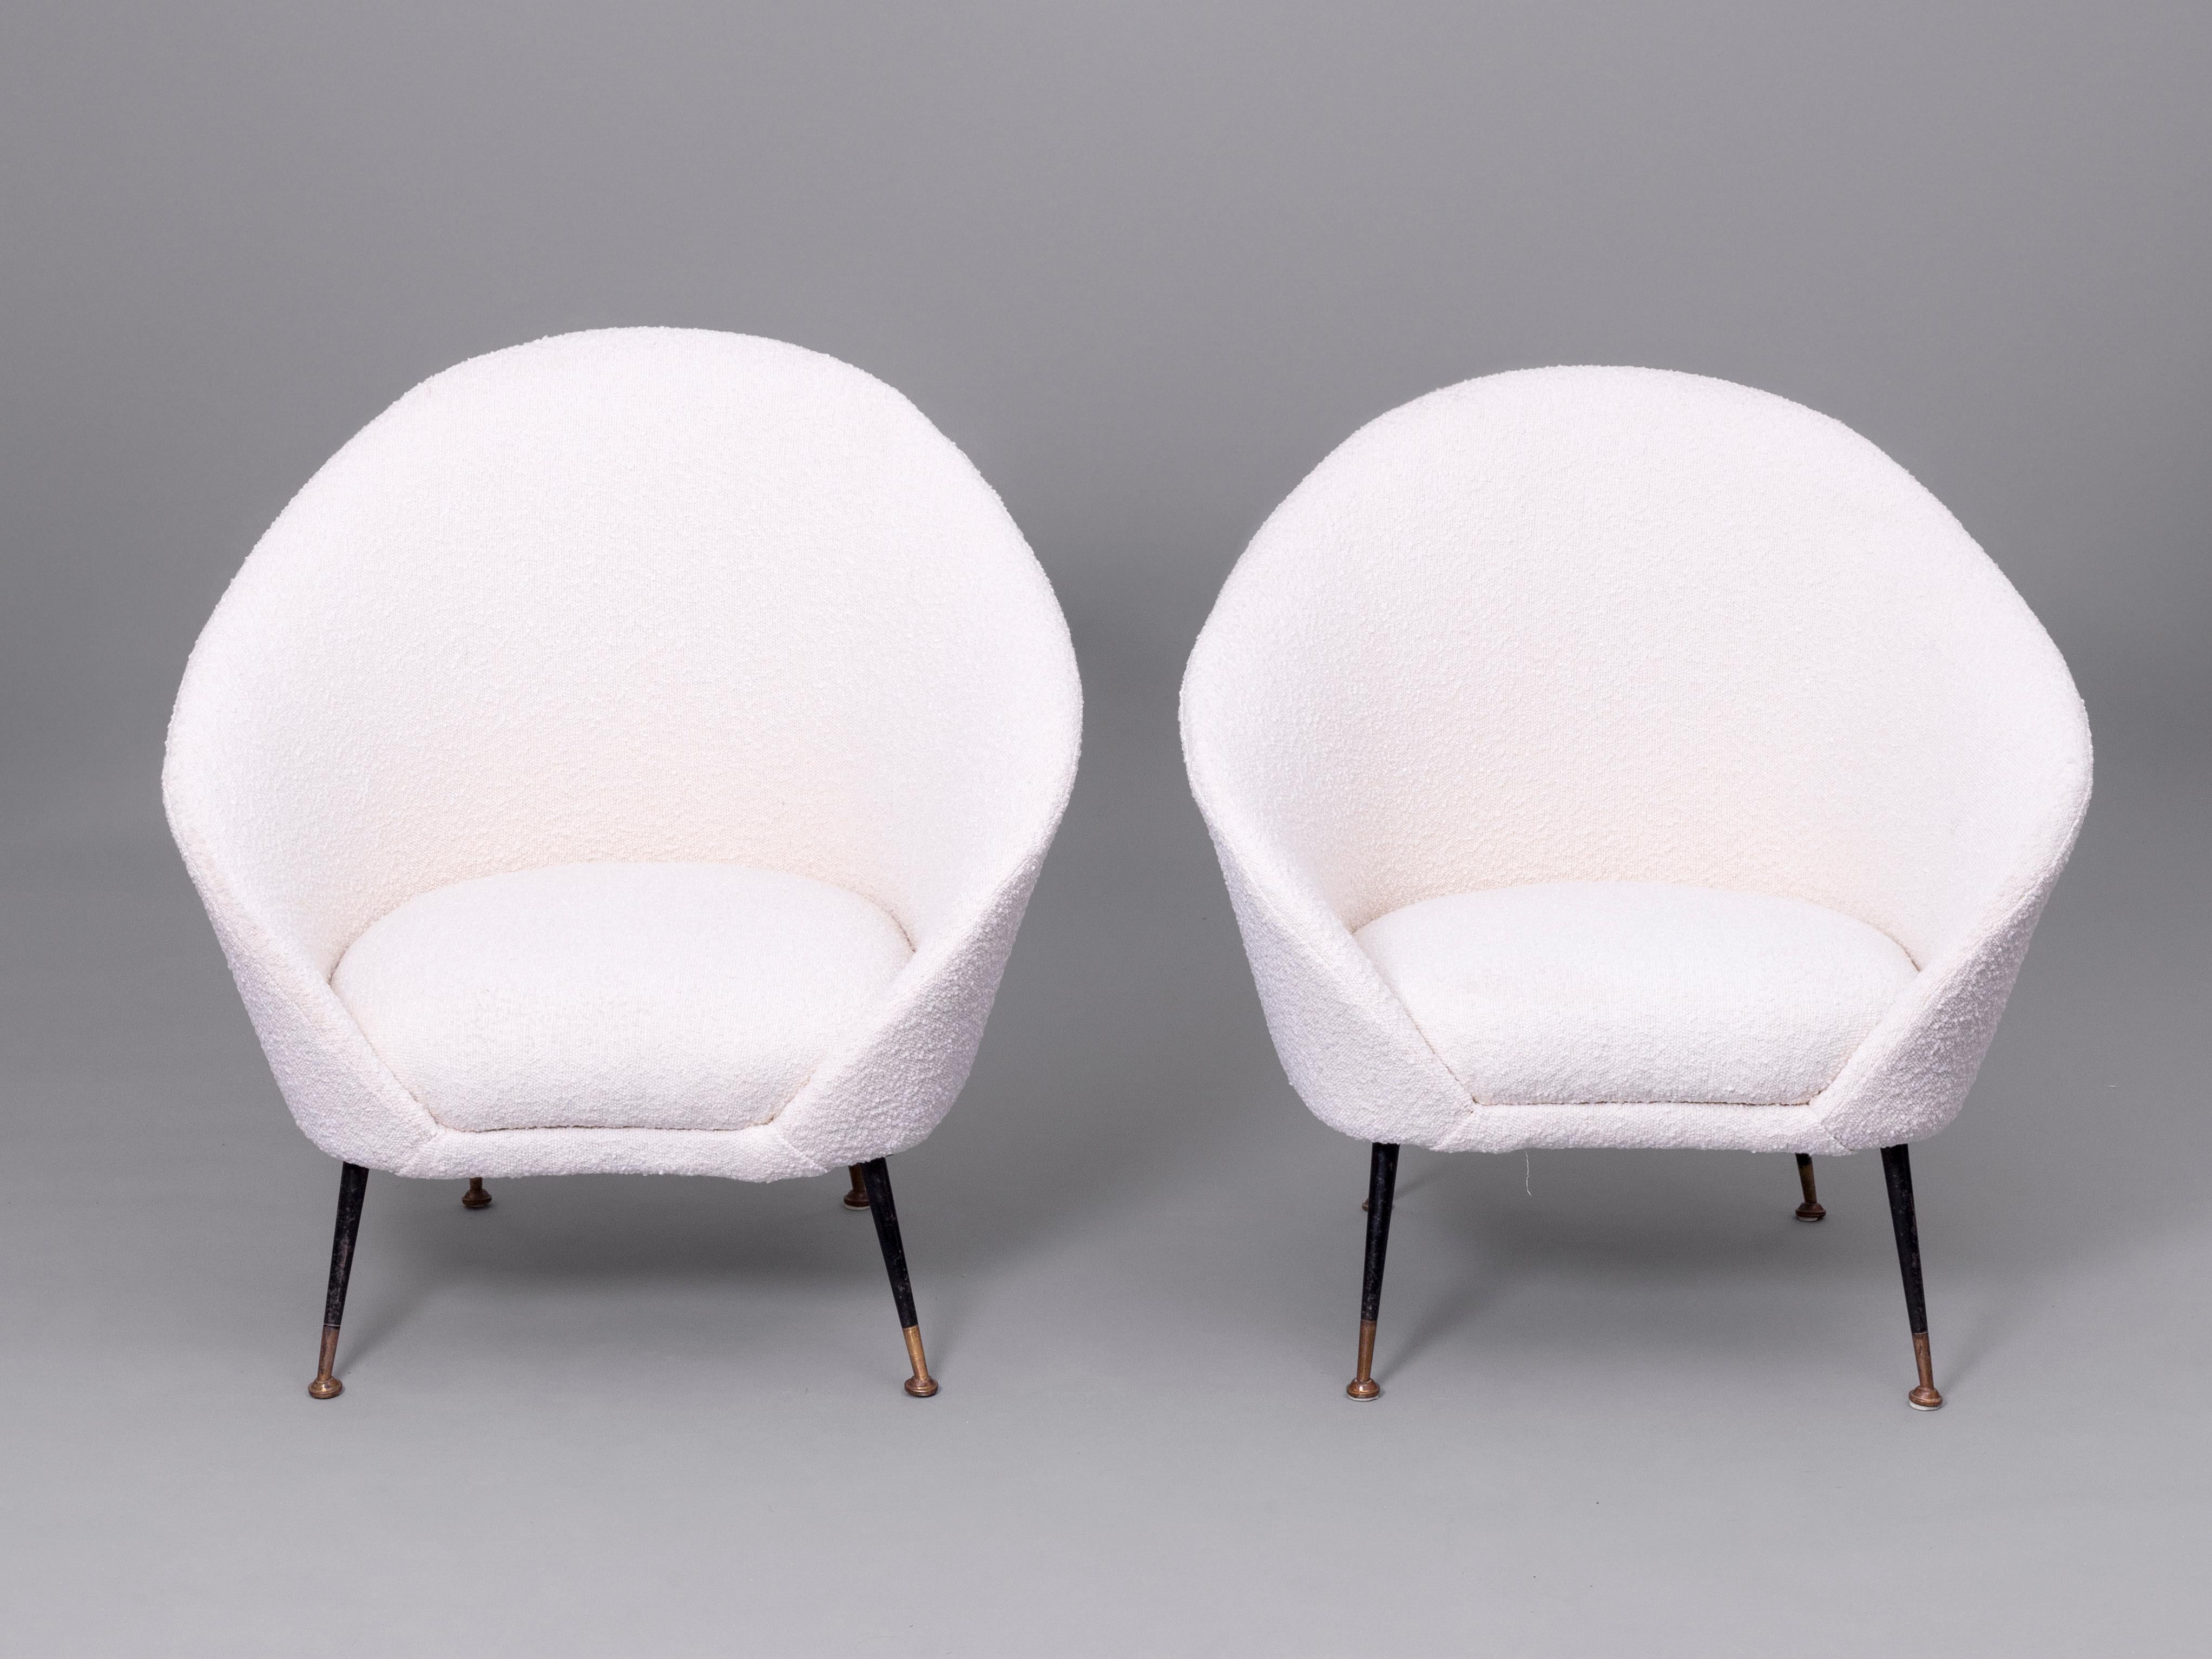 This pair of Federico Munari design Armchairs have been reupholstered in white bouclé. Italy, 1950s

This pair of seats possess the key features of the designer’s unmistakable style, curvy and embracing lines that nest the seat creating a beautiful